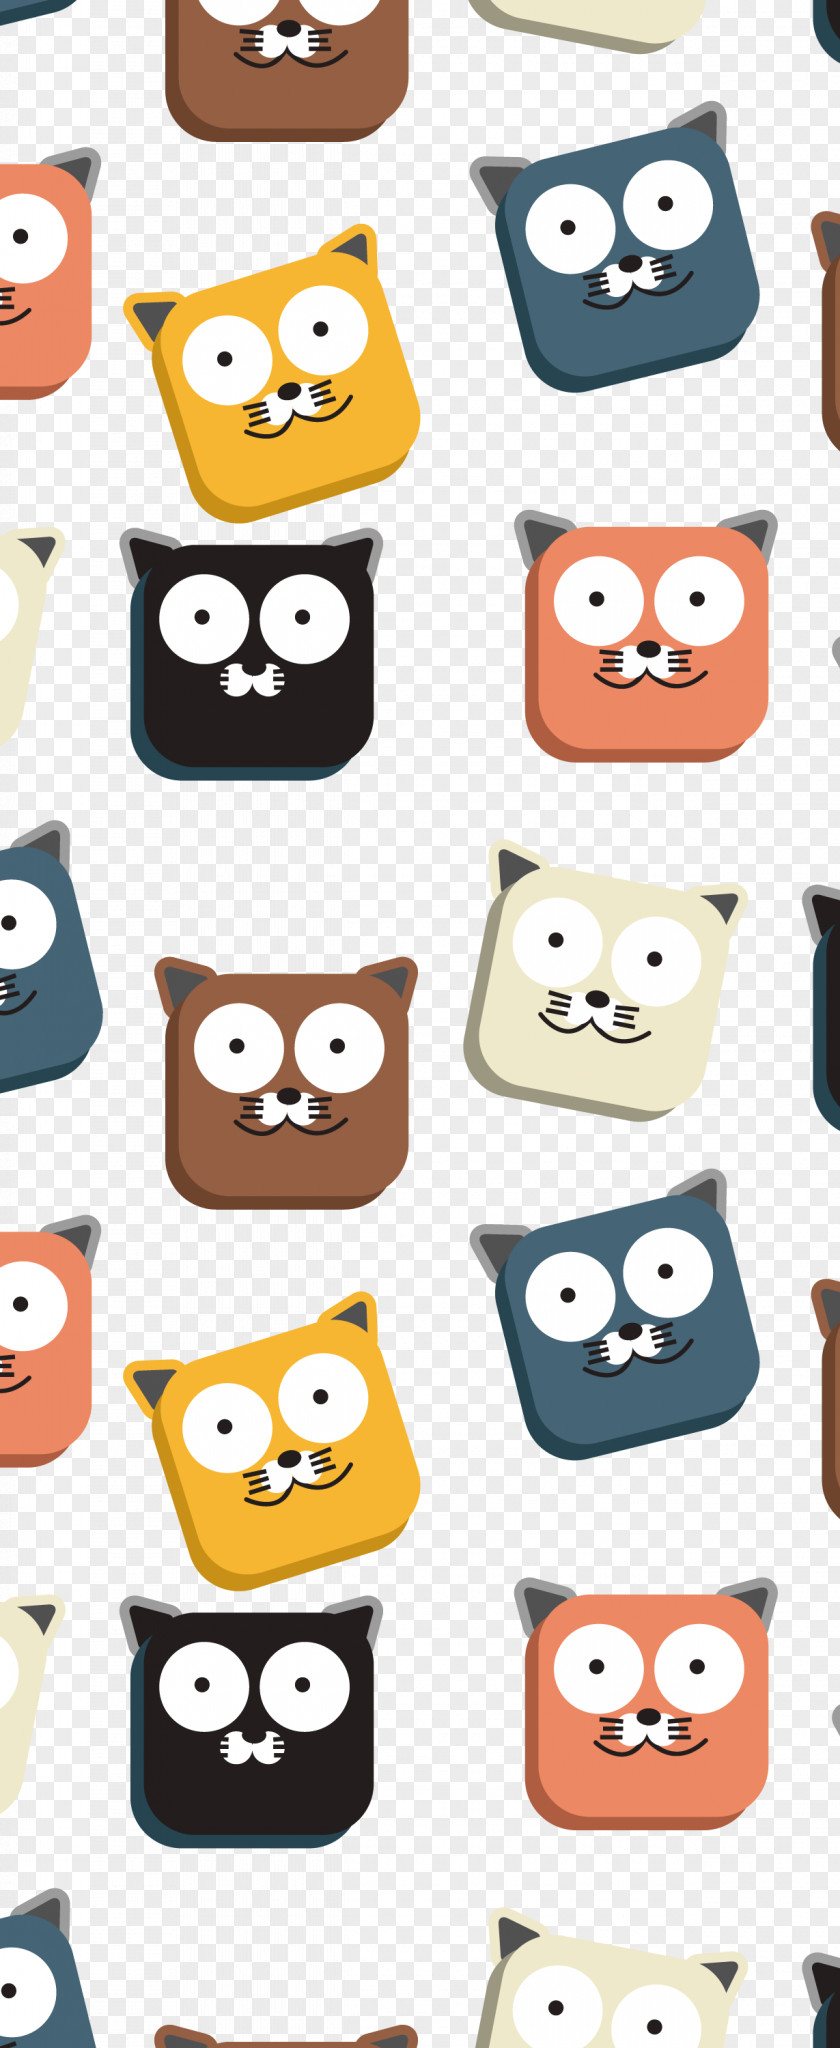 Meow Star Wallpapers Cat Wallpaper PNG